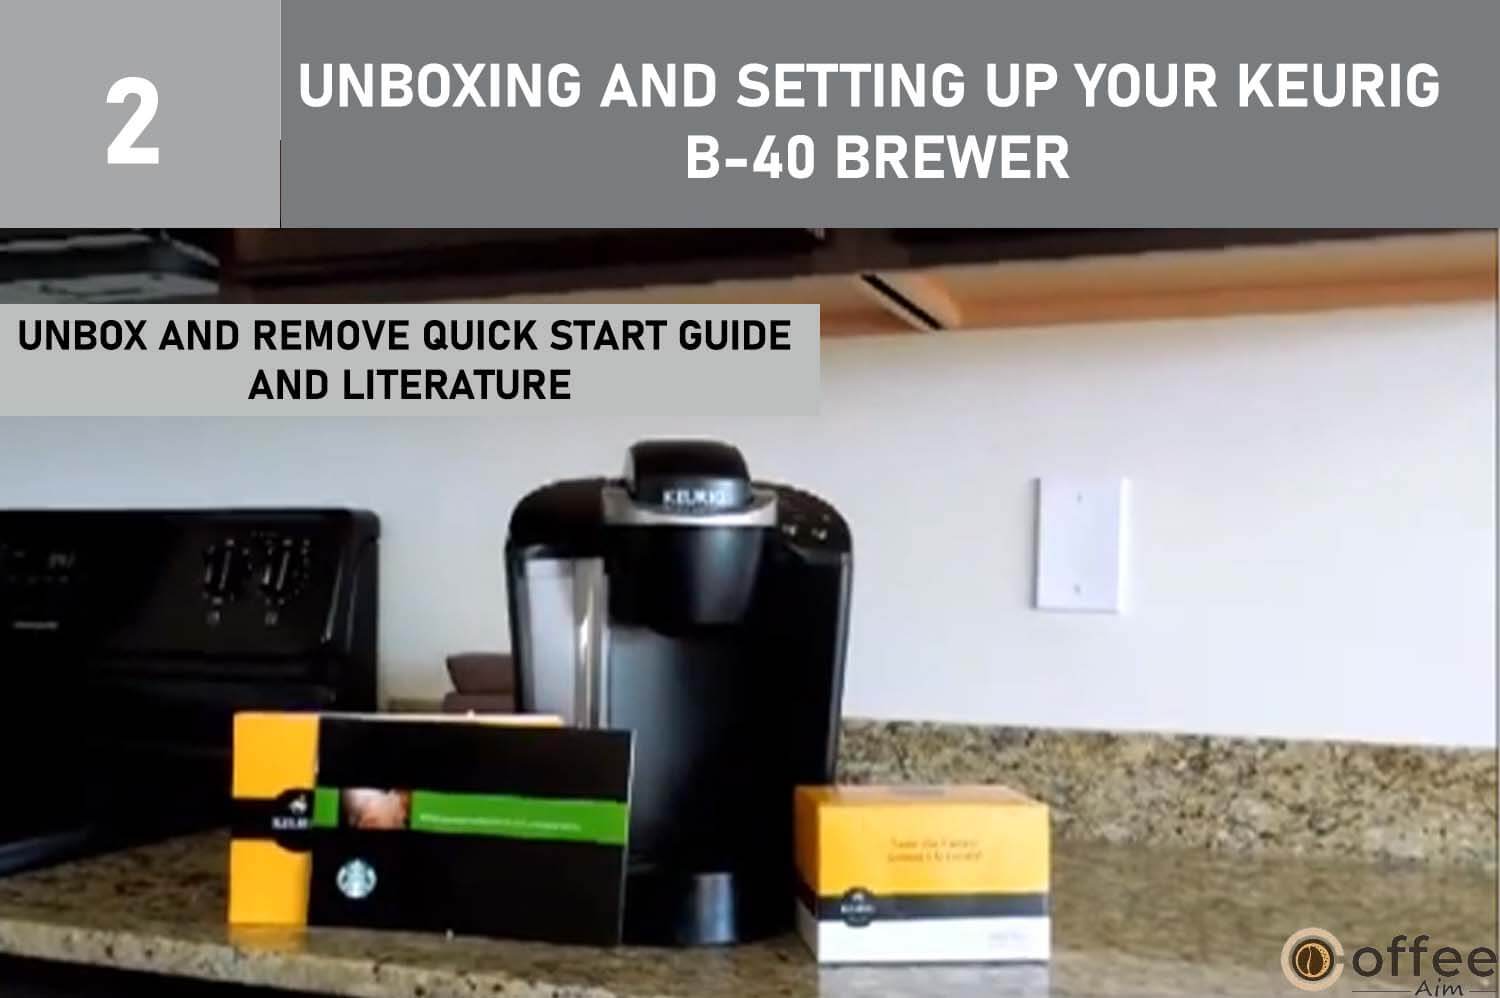 The accompanying image illustrates the process of unboxing the Keurig B-40 Brewer, focusing on the initial steps of removing the quick start guide and literature. This step is crucial in the comprehensive guide titled "Unboxing and Setting Up Your Keurig B-40 Brewer," which is an integral part of the broader article "How to Use Keurig B-40